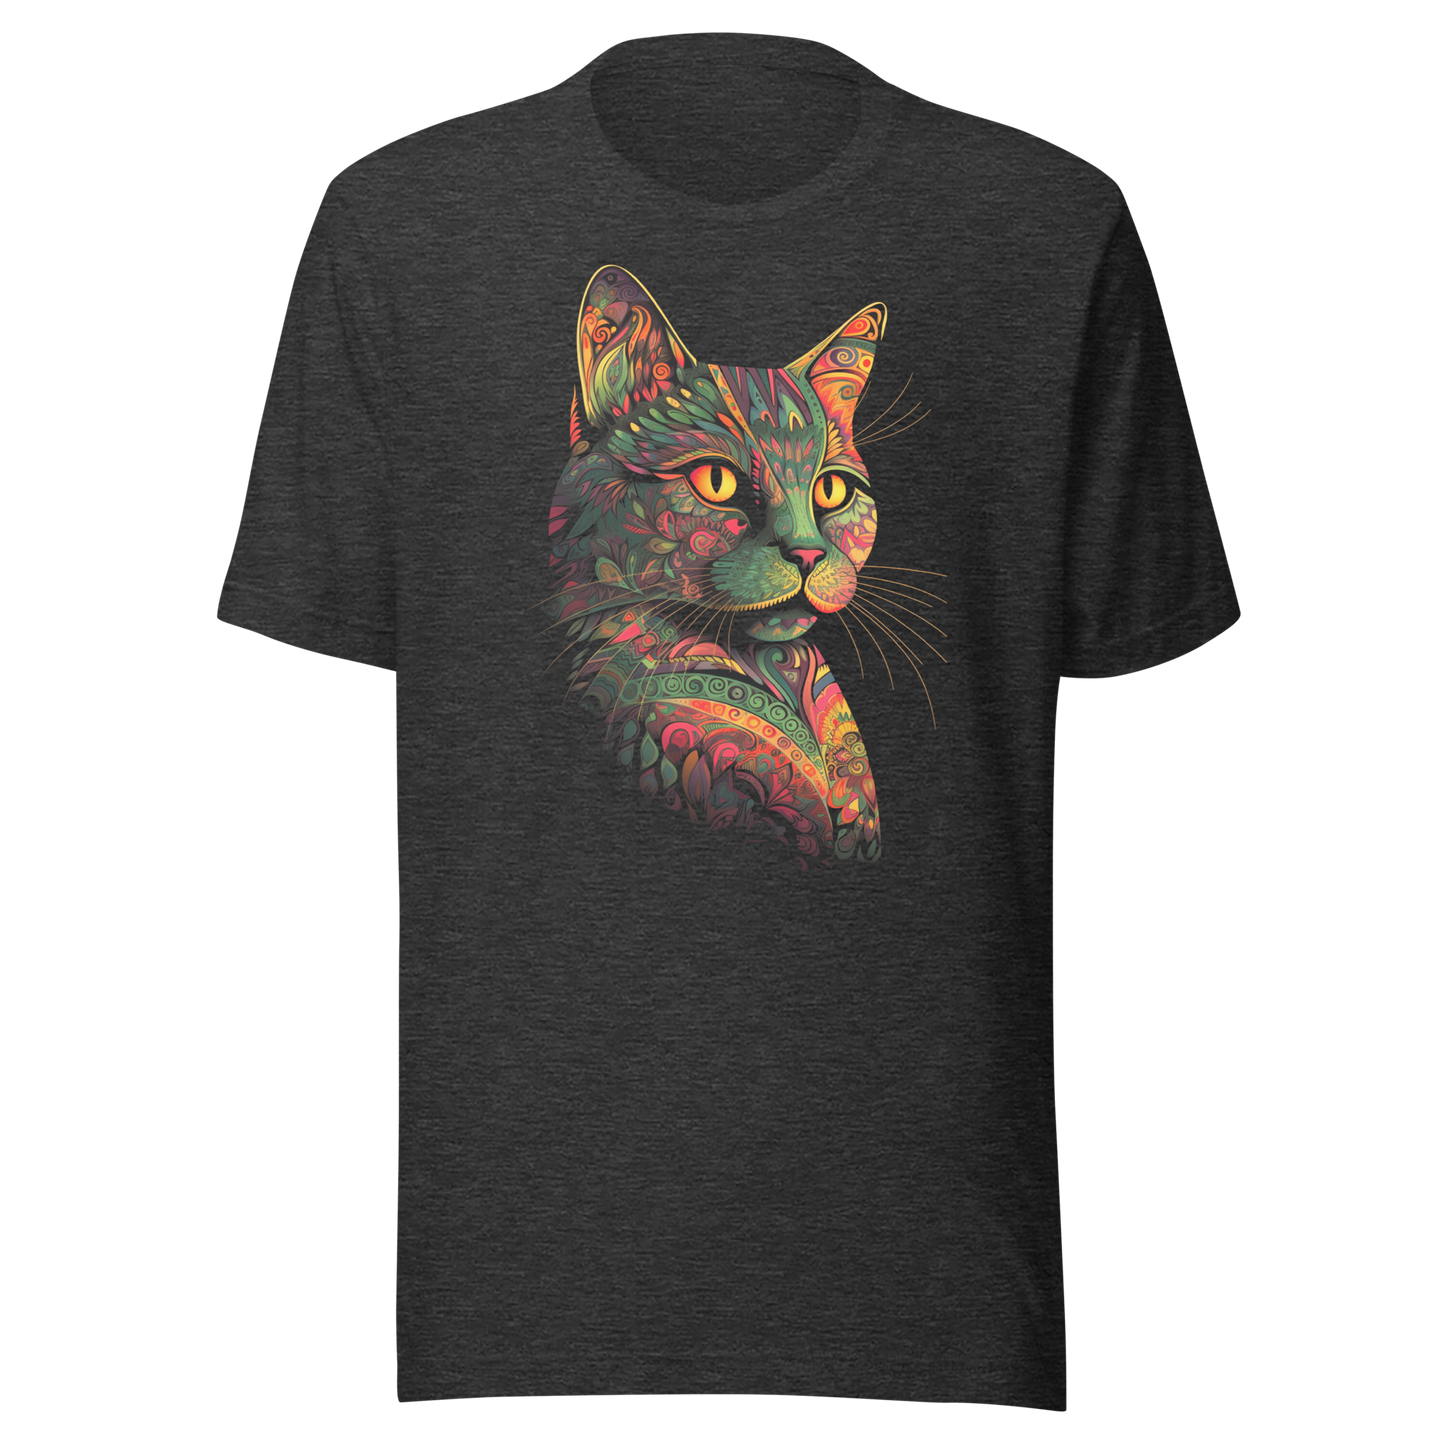 Shop Colorful Cat Print Unisex T-shirts and Stand Out in Style